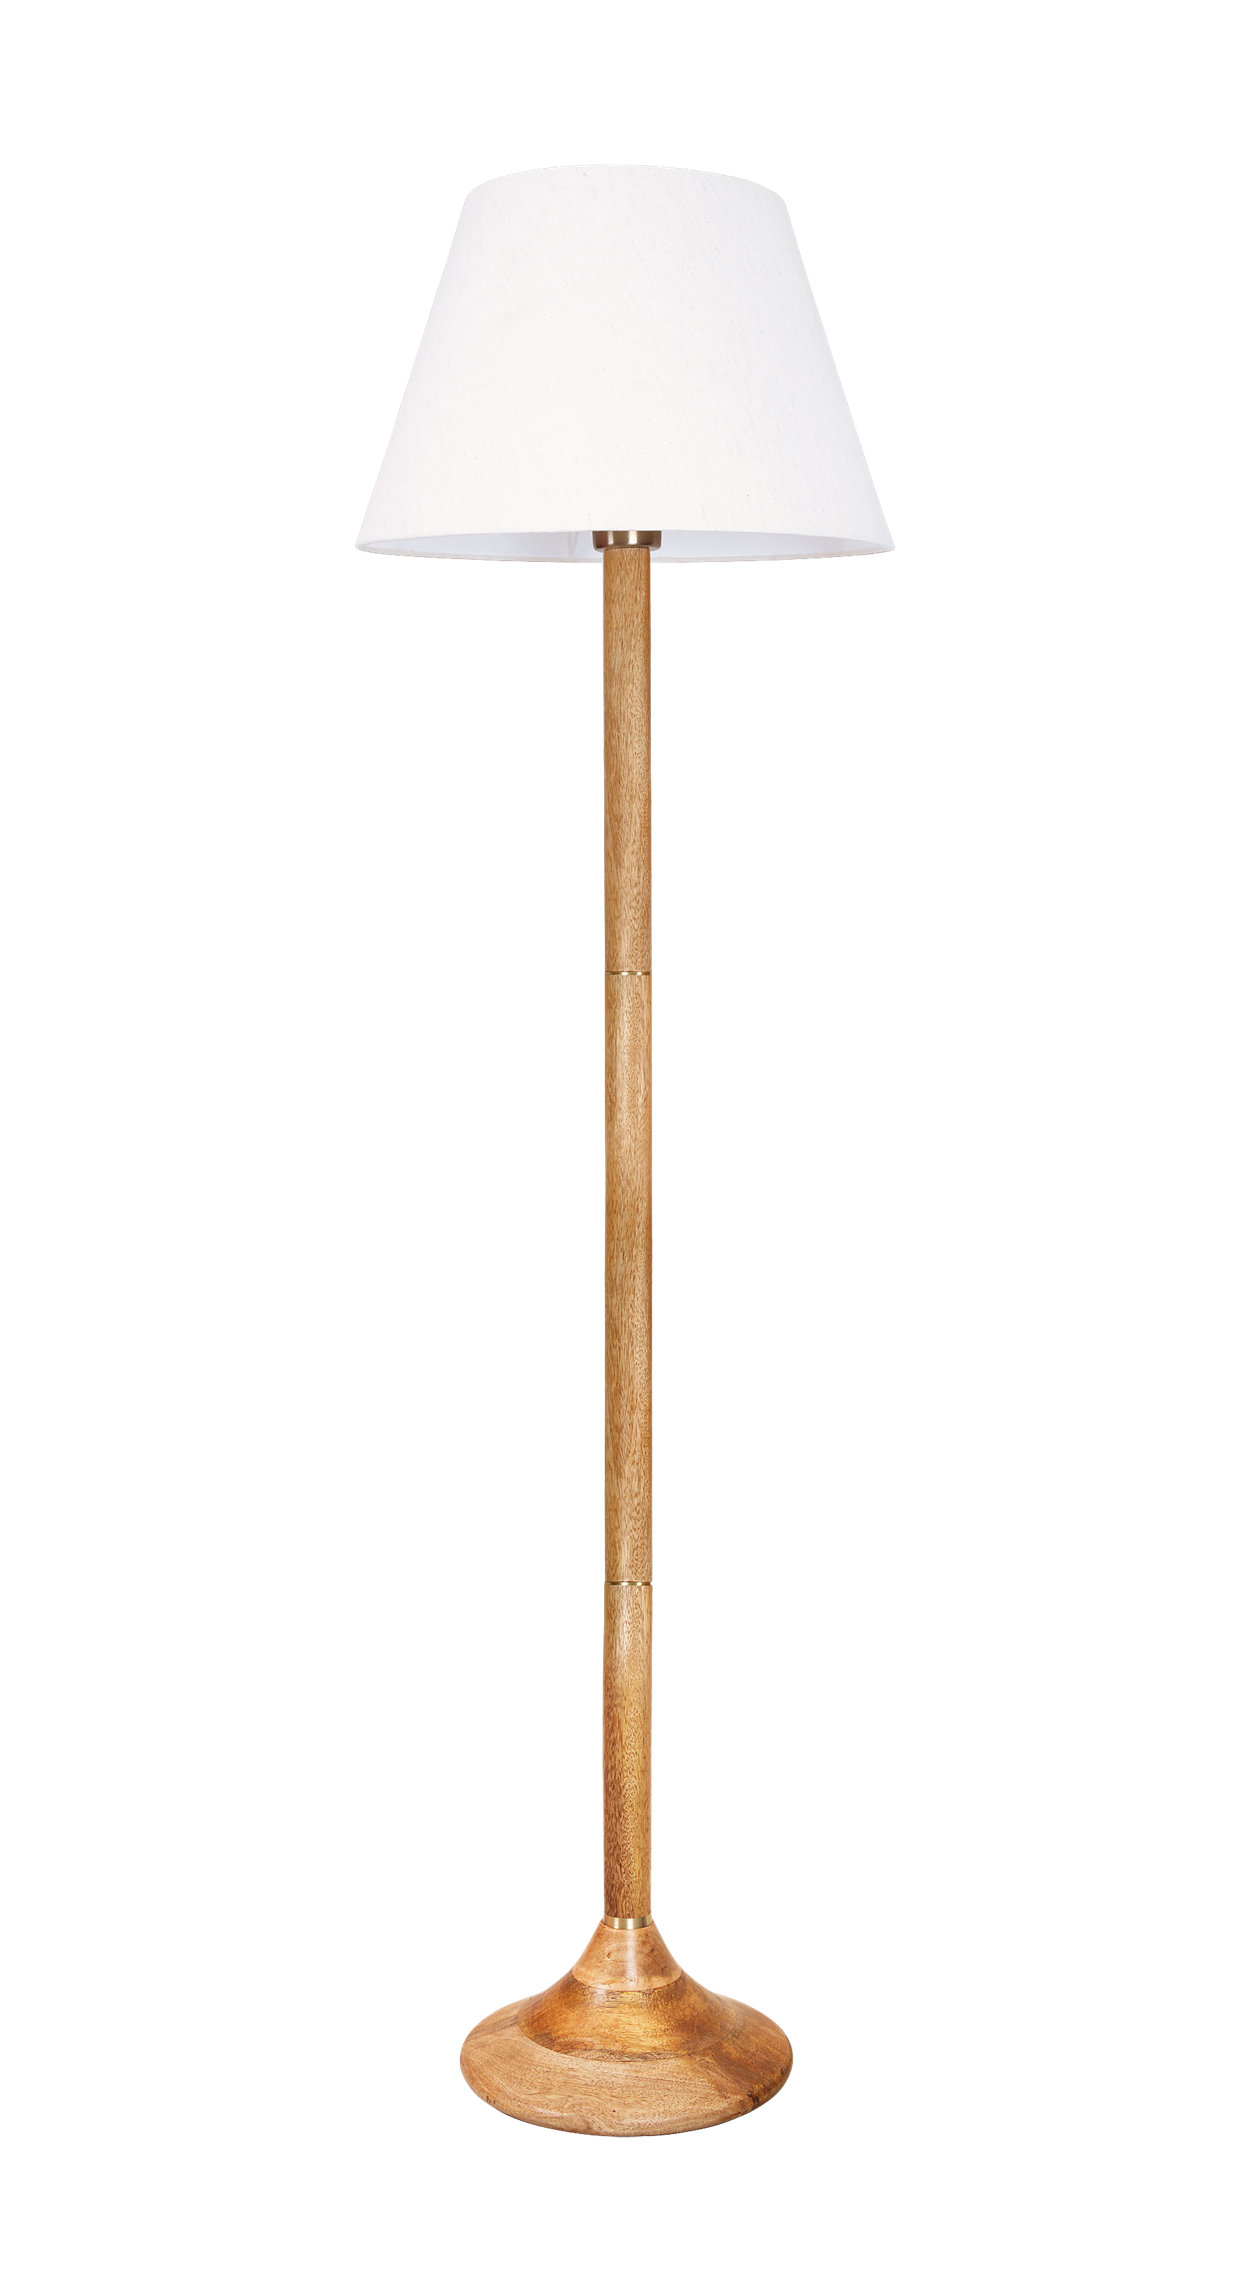 Good old-world charm of a classical wooden floor lamp